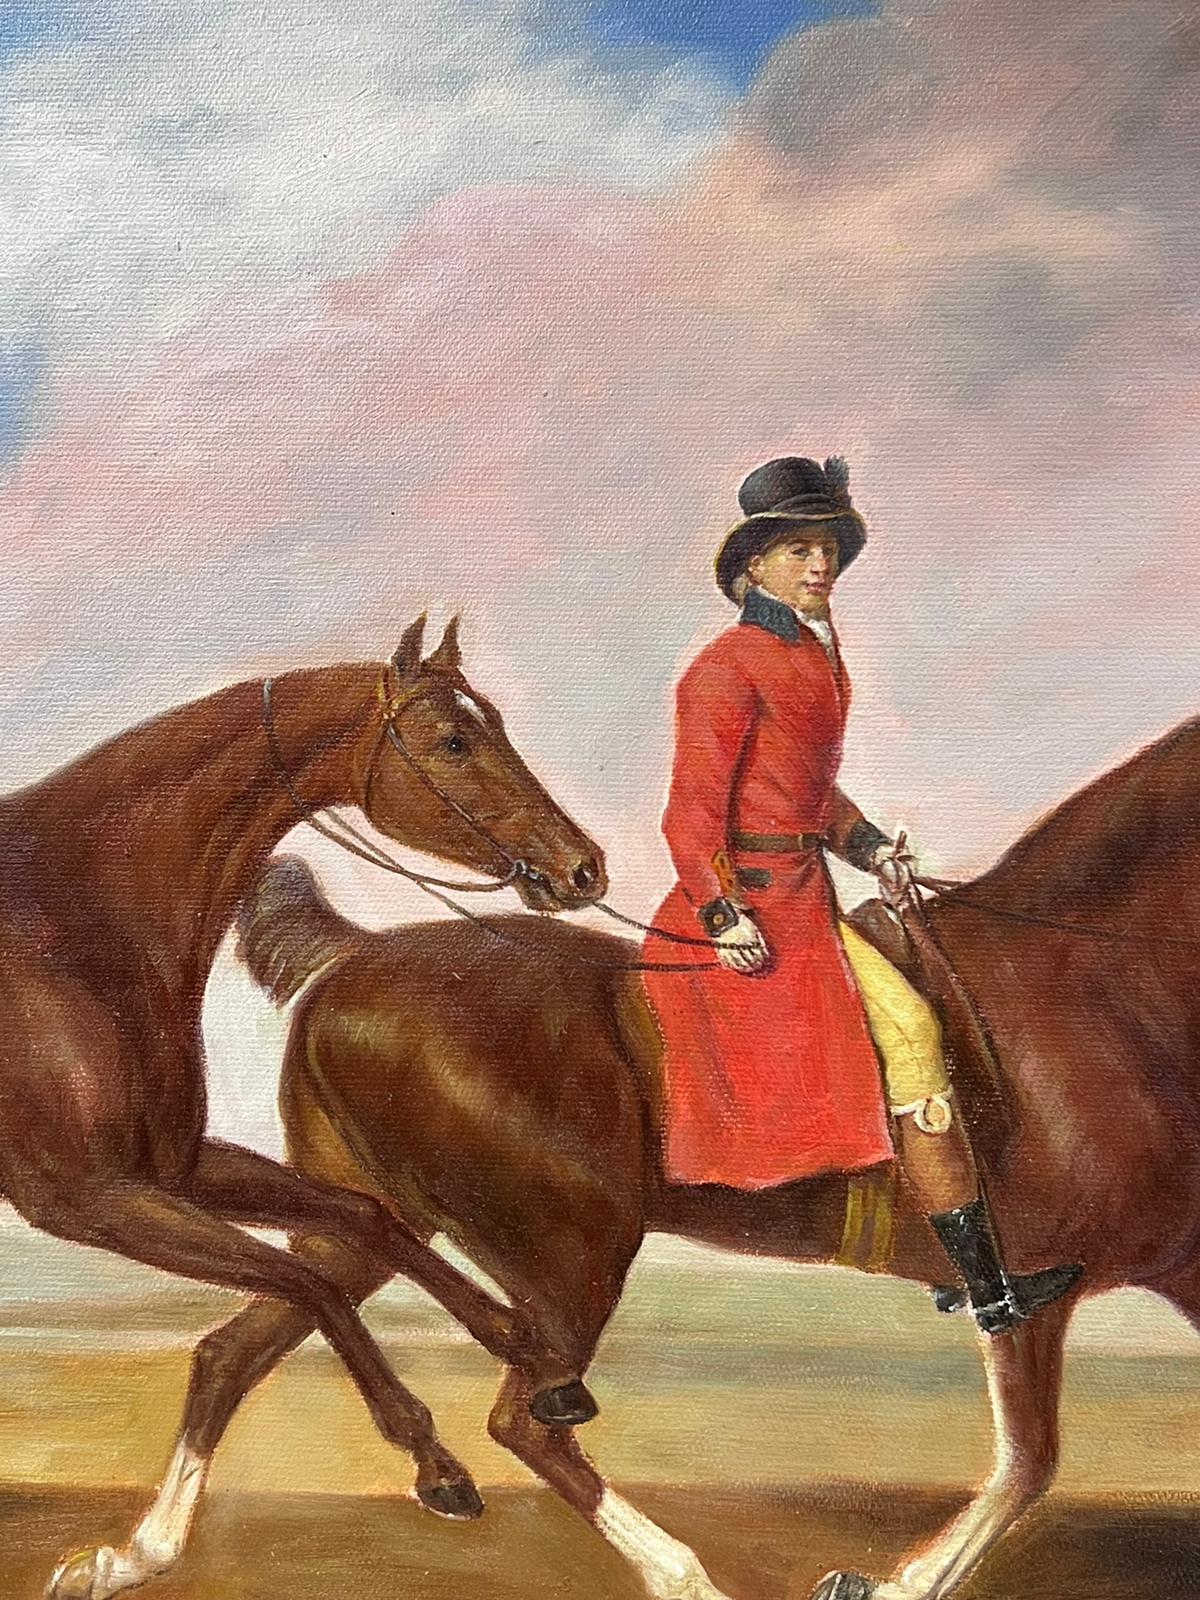 Large Sporting Art Oil Painting Rider on Horseback with Another Horse framed For Sale 2